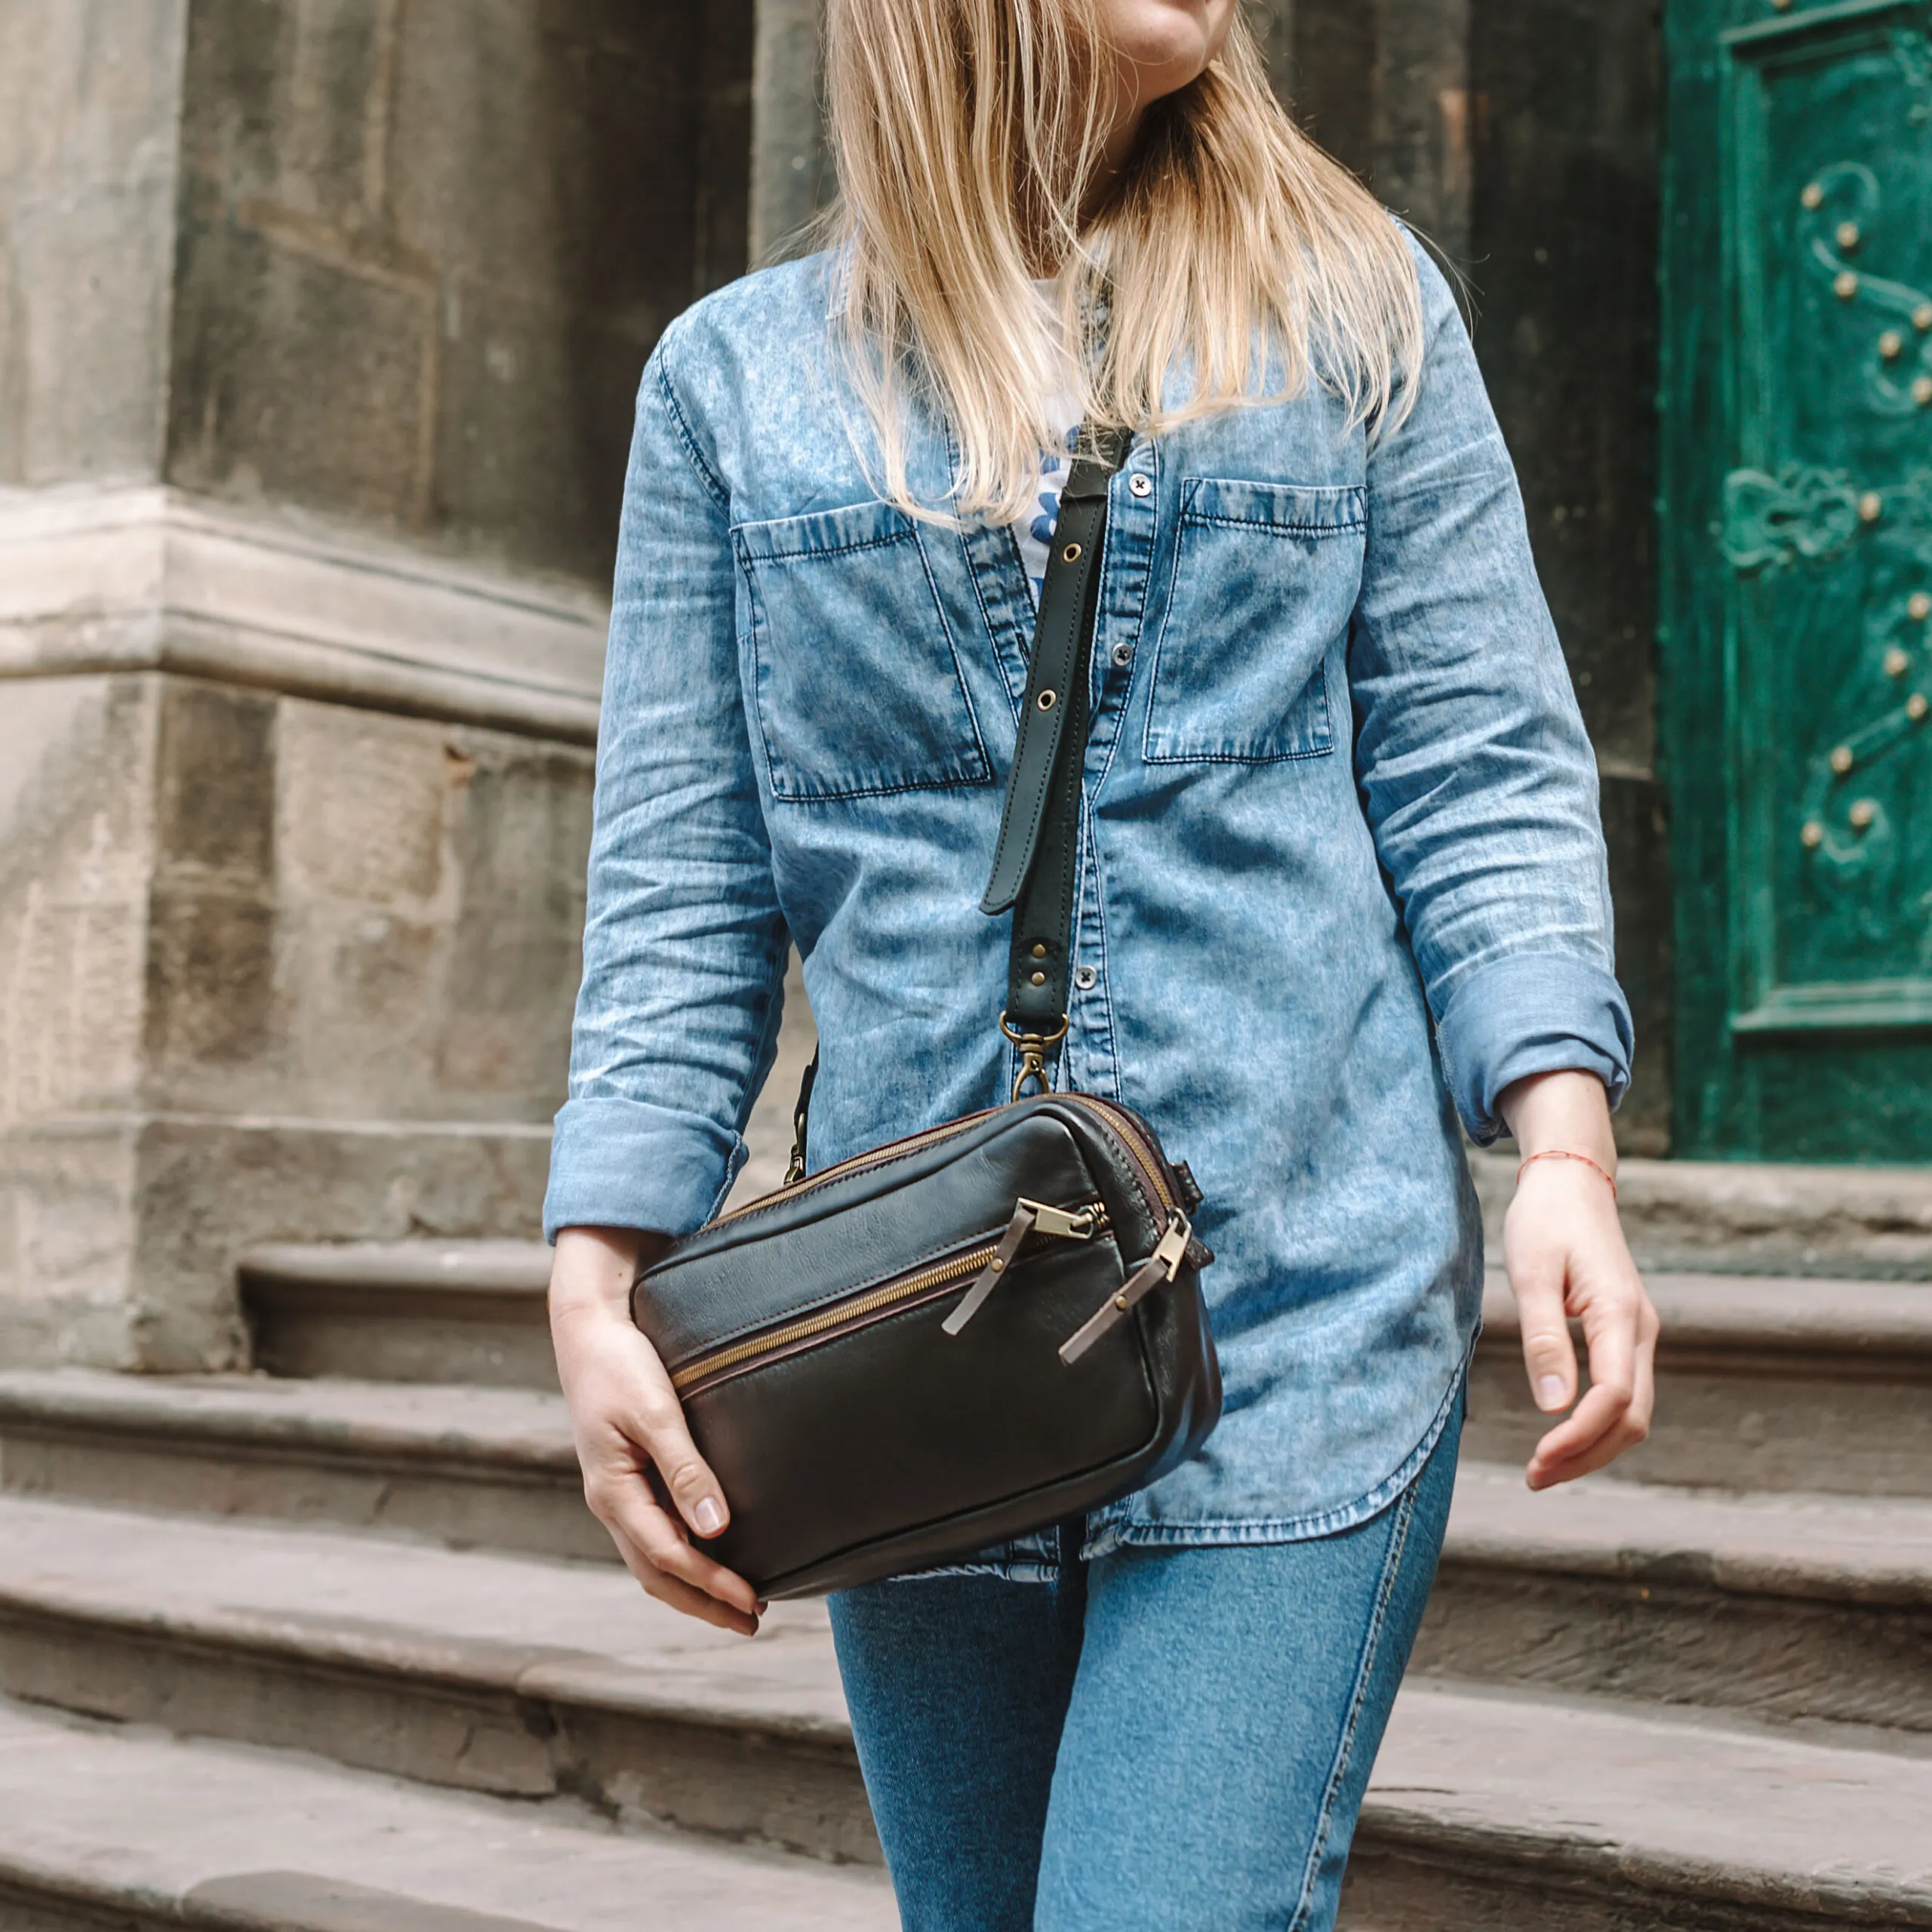 Leather sling bag for women. Belt Bag Minimalist. Blond woman in denim shirt and, blue jeans and a dark brown leather bag over the shoulder. Close-up.